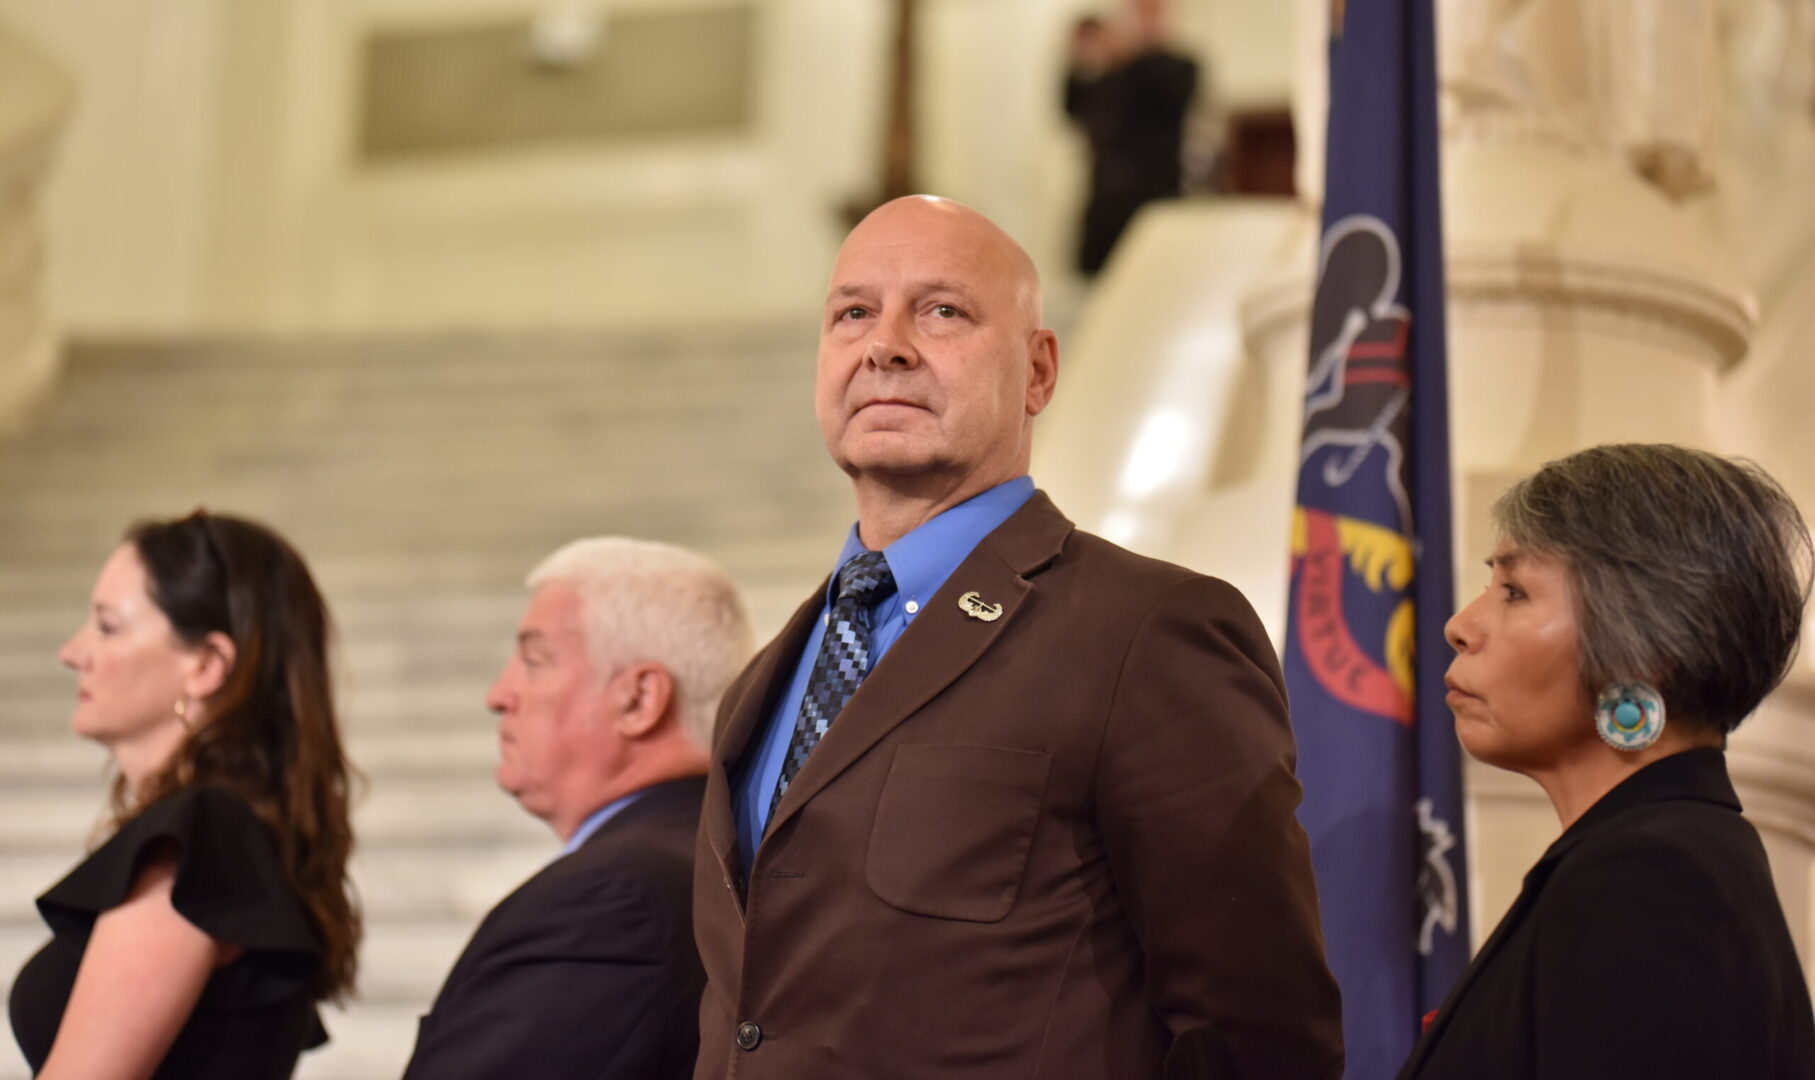 State Sen. Doug Mastriano (R-Franklin), the 2022 Republican candidate for governor, glances into a crowd gathered for a rally celebrating William Penn in the state Capitol rotunda in Harrisburg on July 1, 2022. 